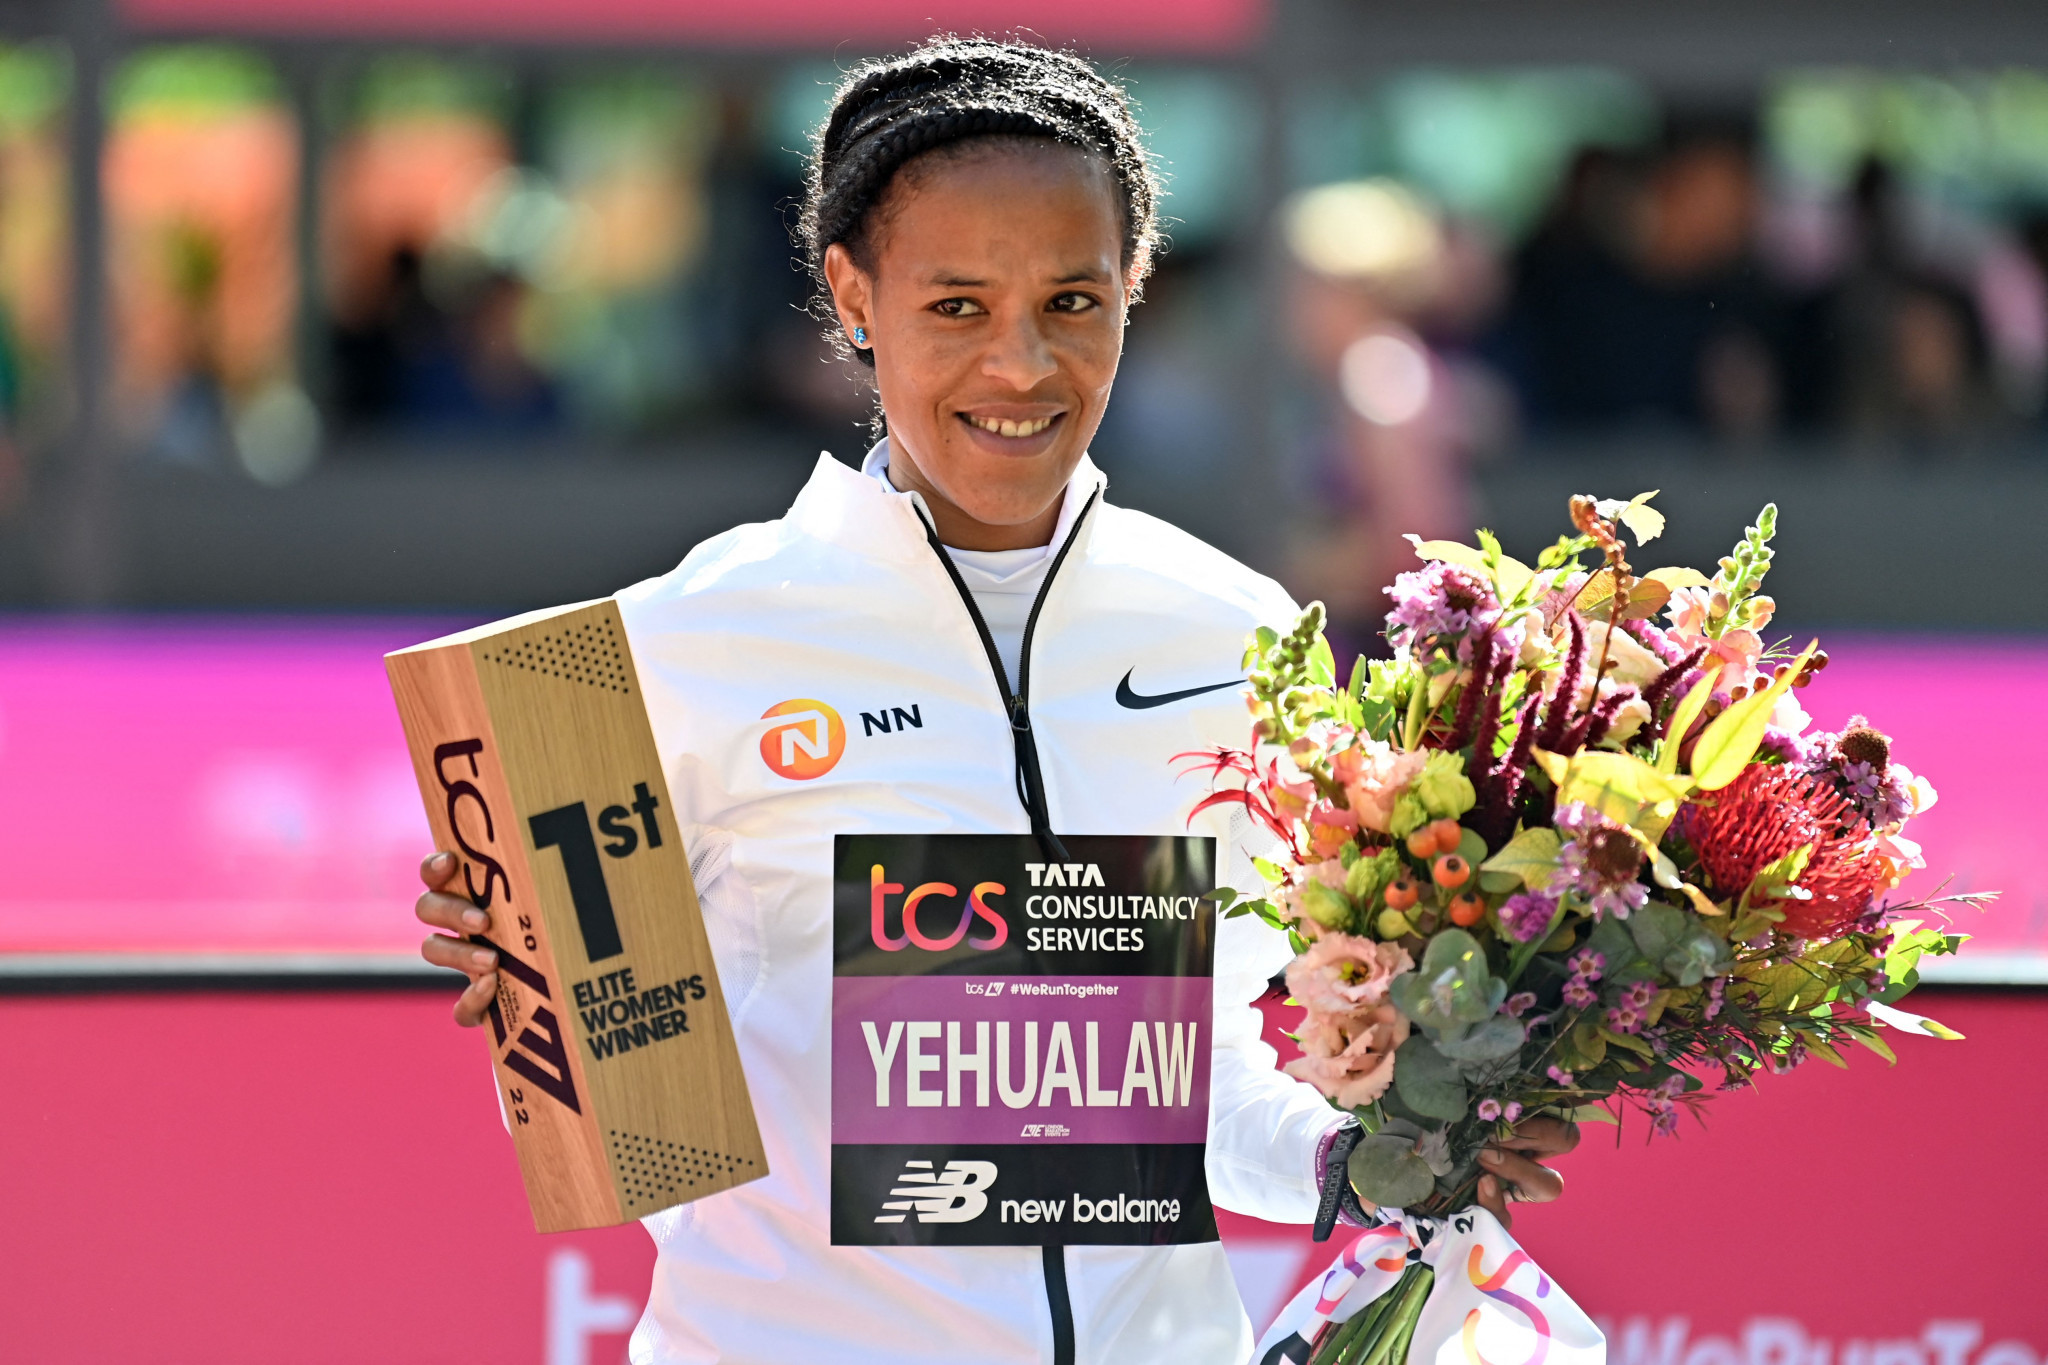 Ethiopia's 23-year-old Yalemzerf Yehualaw became the youngest-ever winner of the women's race at the London Marathon ©Getty Images